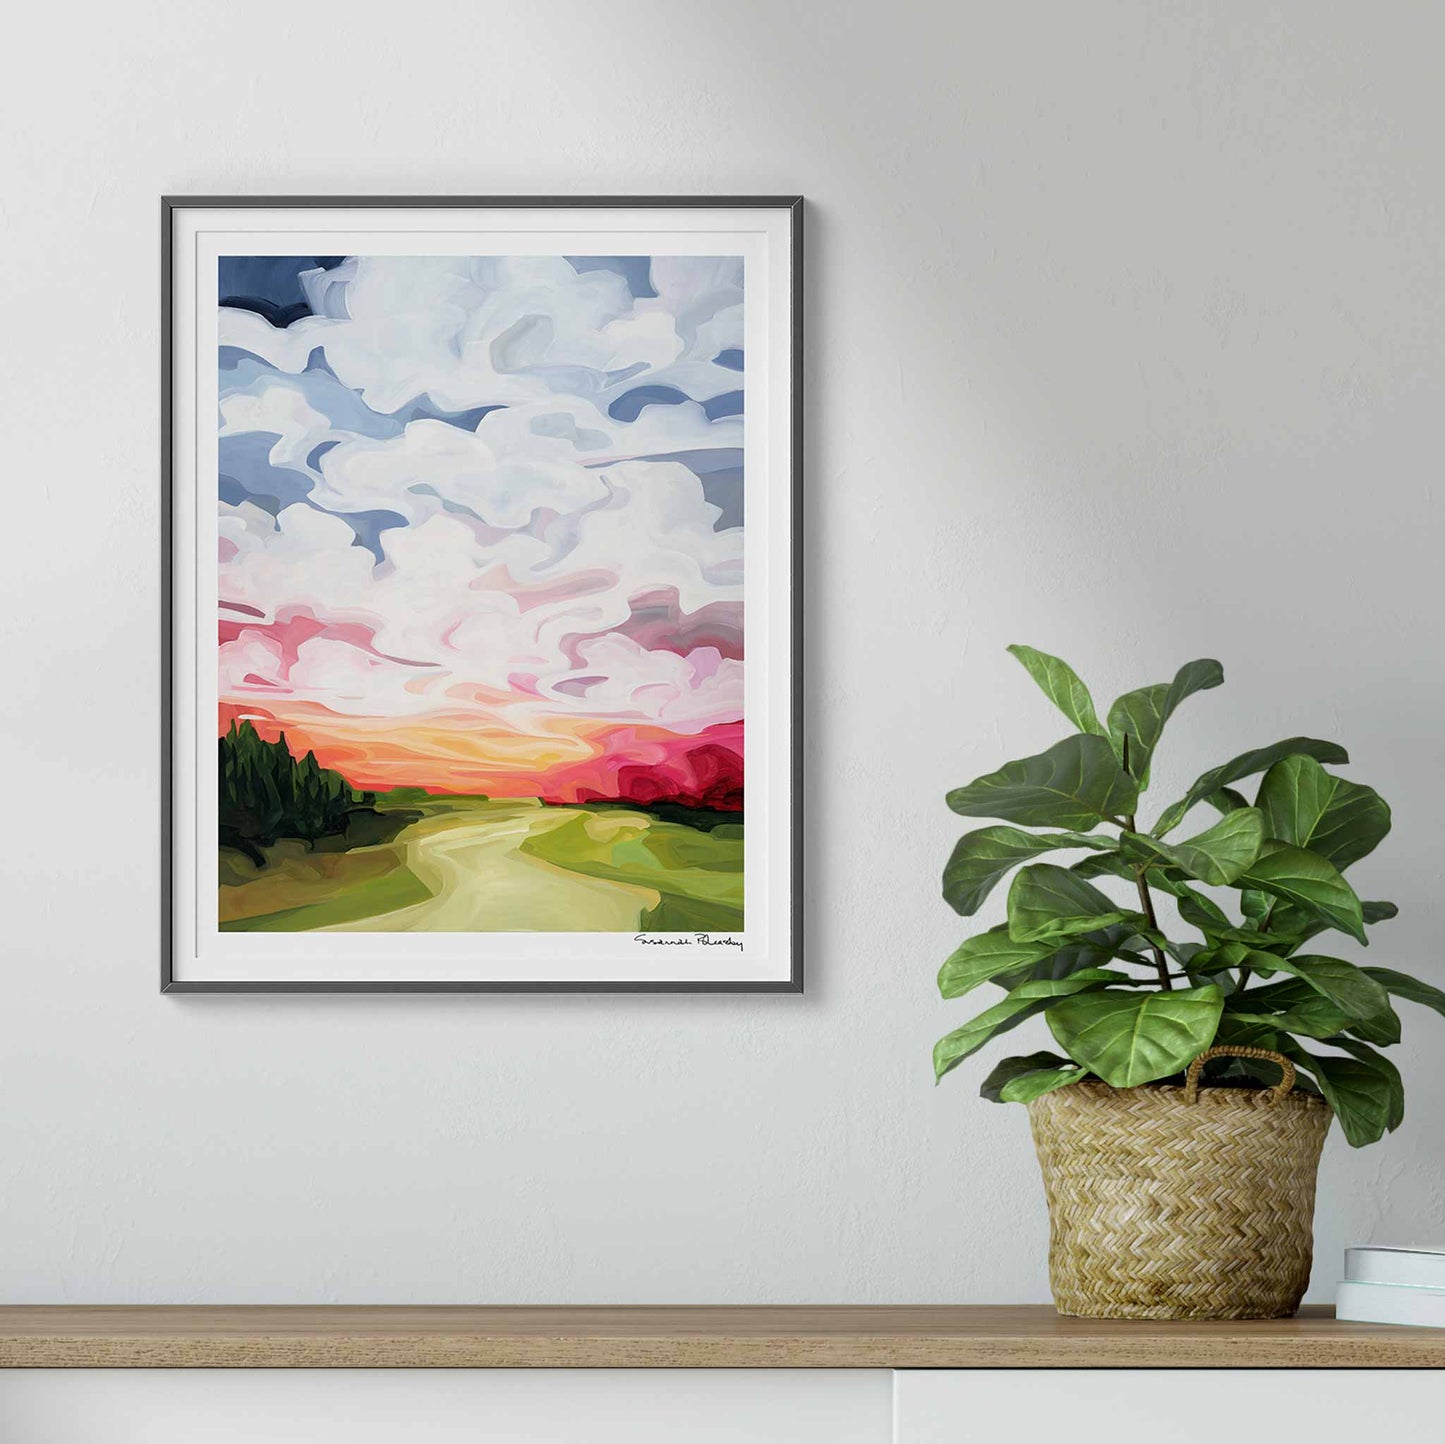 16x20 art print of an inspiring sunrise painting by Canadian abstract artist Susannah Bleasby